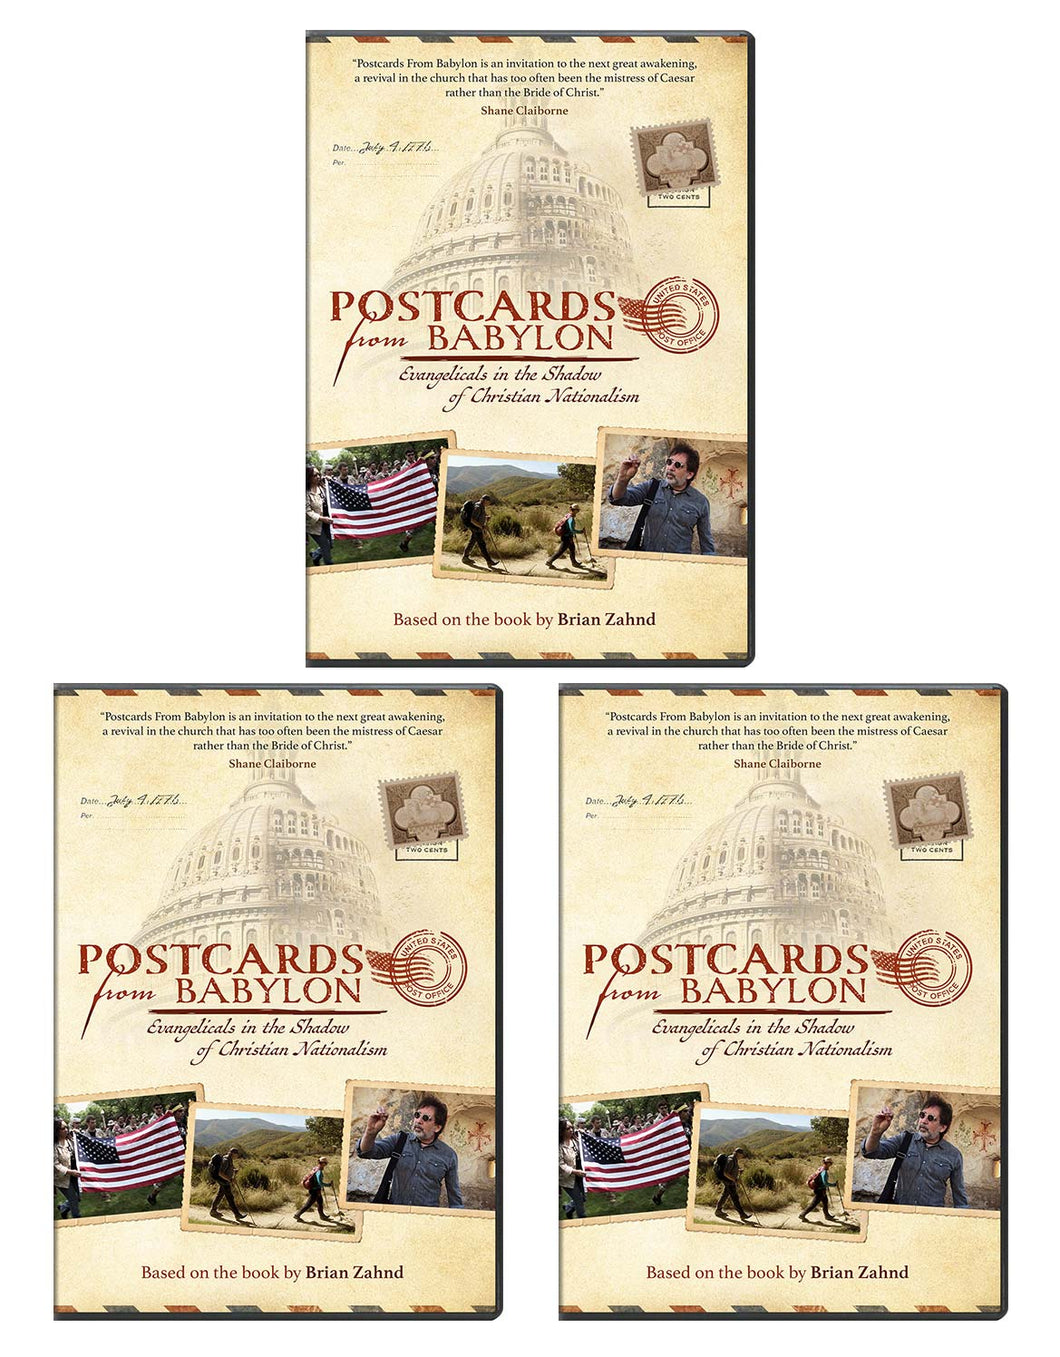 Postcards from Babylon - Evangelicals in the Shadow of Christian Nationalism - DVD 3-Pack